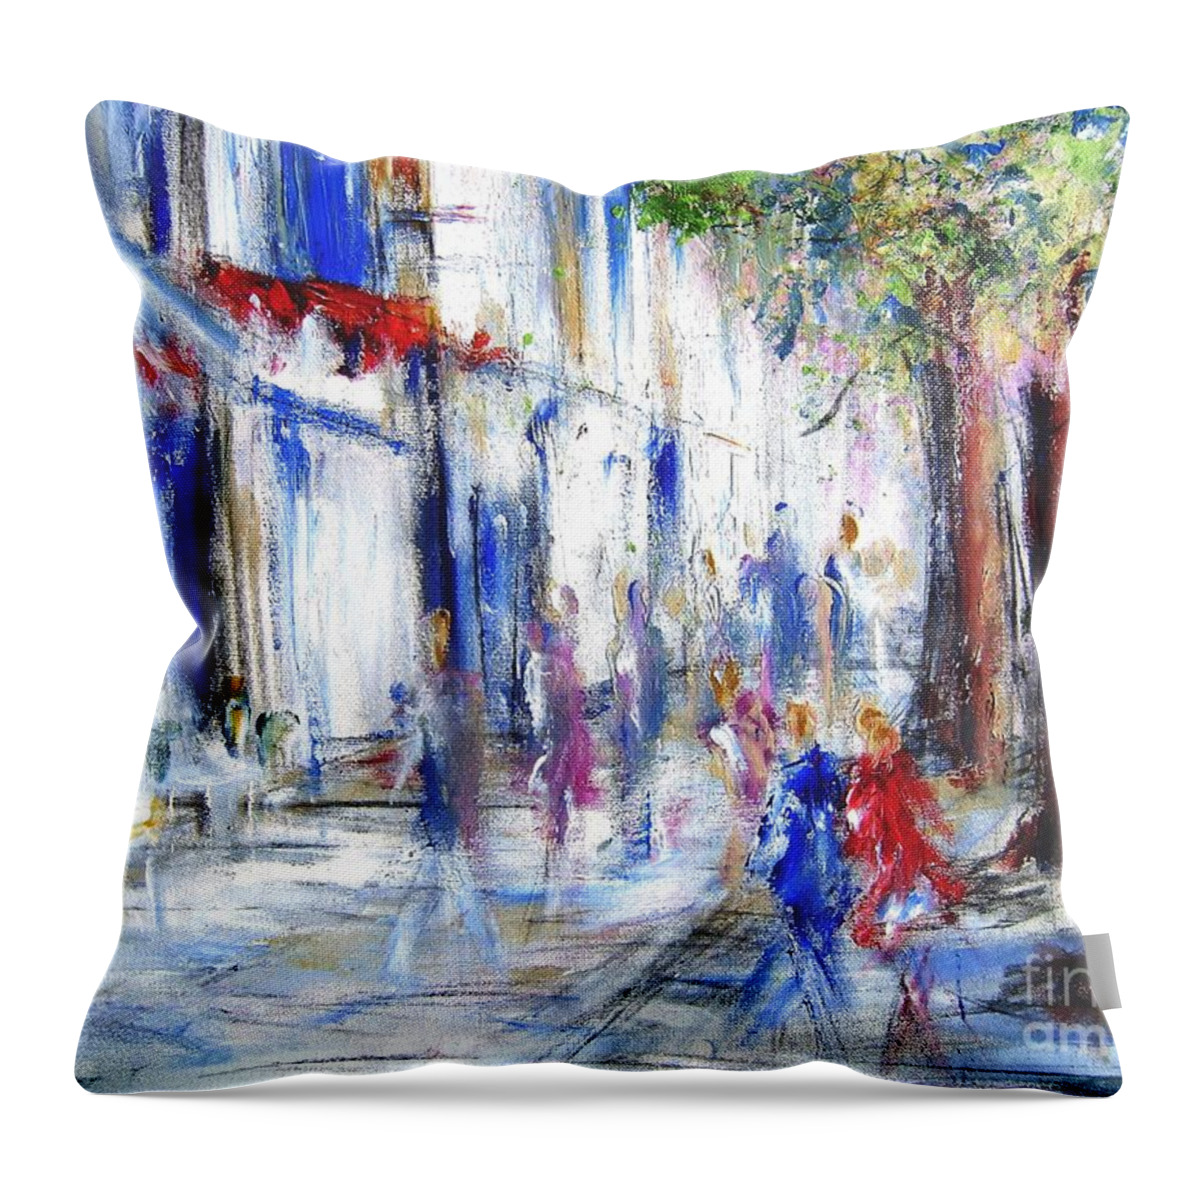 Semi Abstract Throw Pillow featuring the painting Commission A Custom Painting Of Your Faorite Street In Semi Abstract Style Like This One by Mary Cahalan Lee - aka PIXI